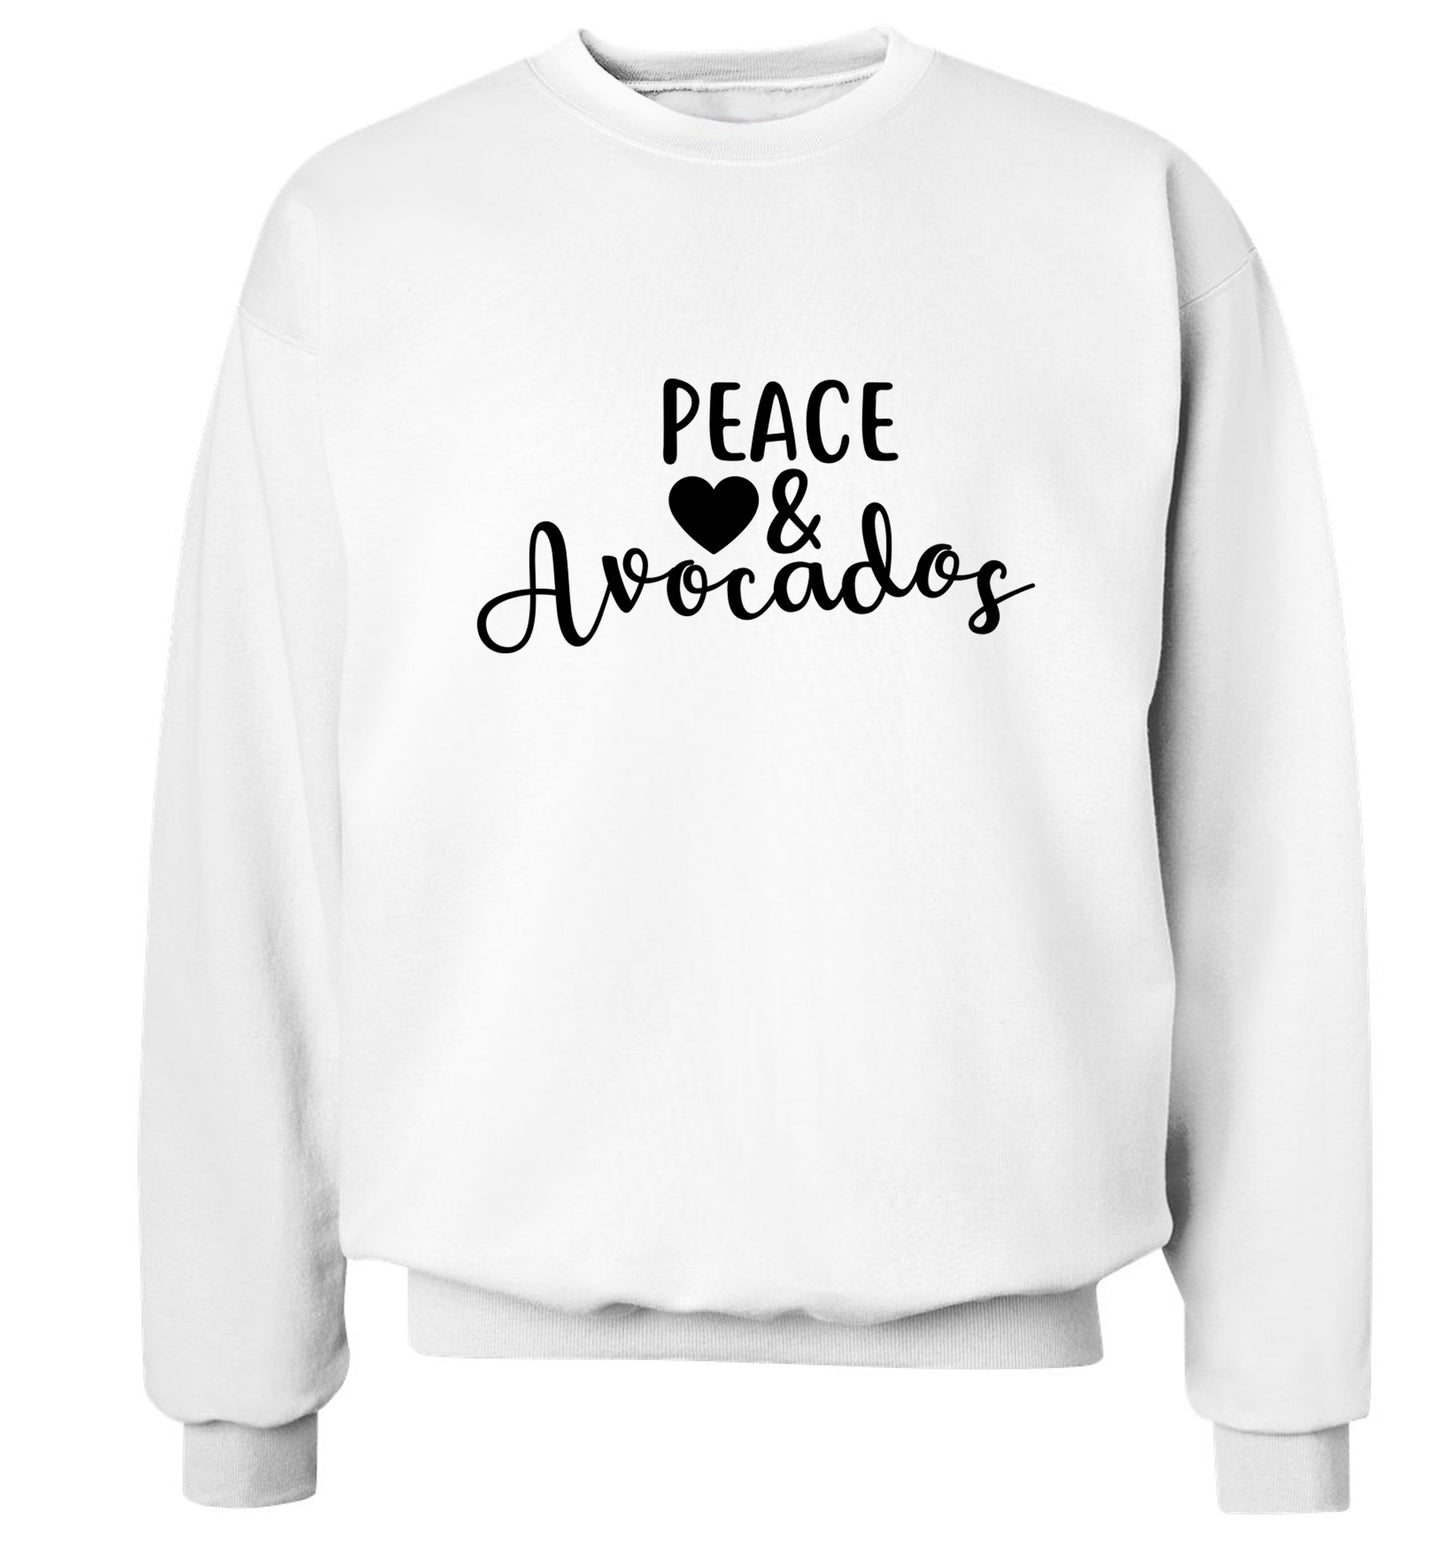 Peace love and avocados Adult's unisex white Sweater 2XL